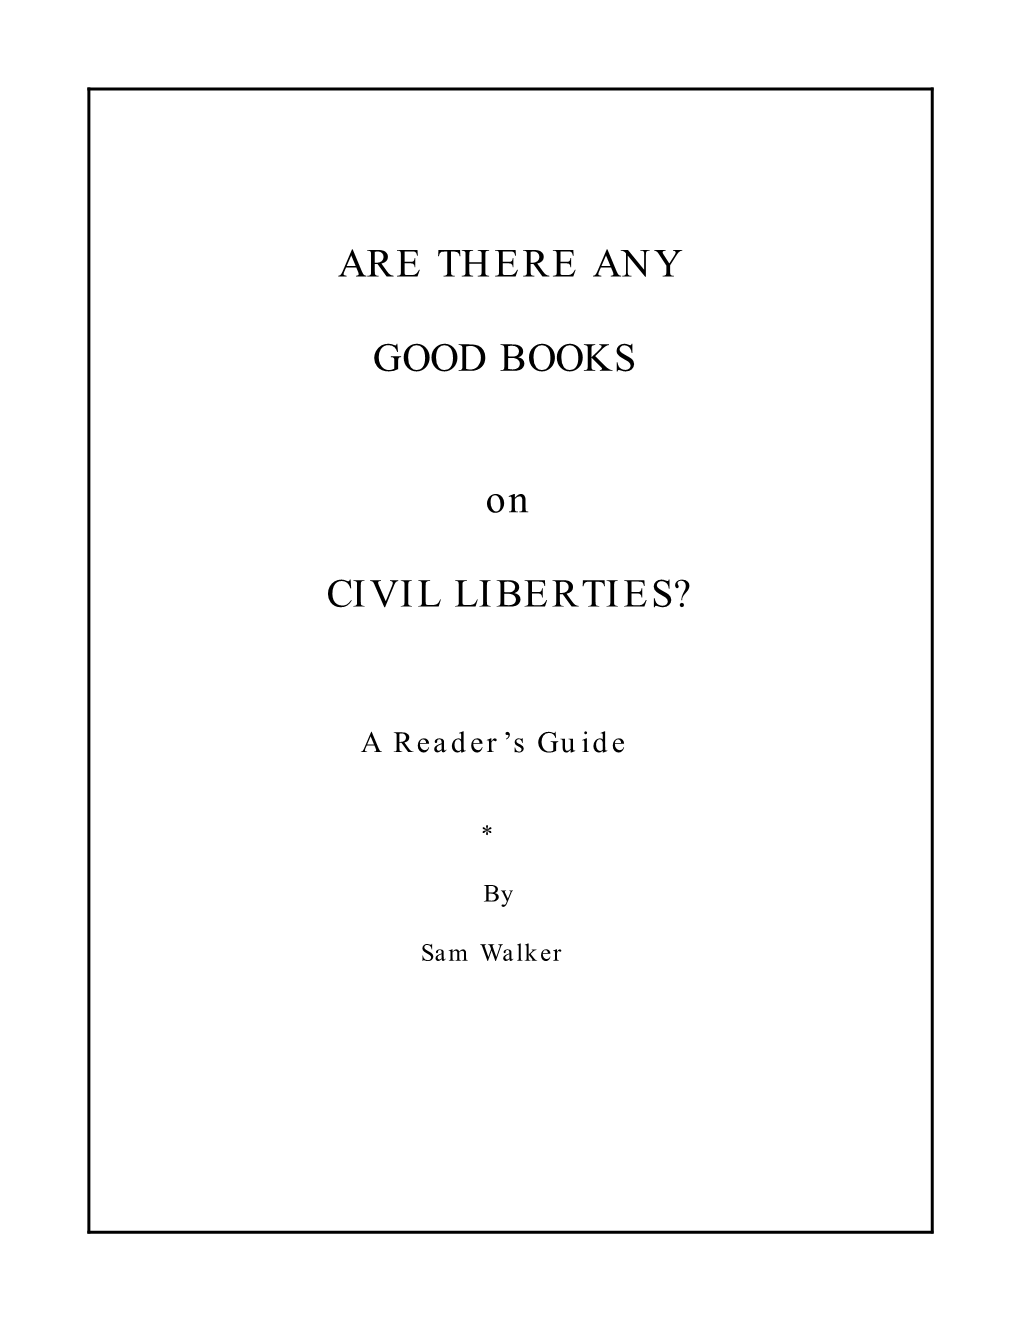 ARE THERE ANY GOOD BOOKS on CIVIL LIBERTIES?